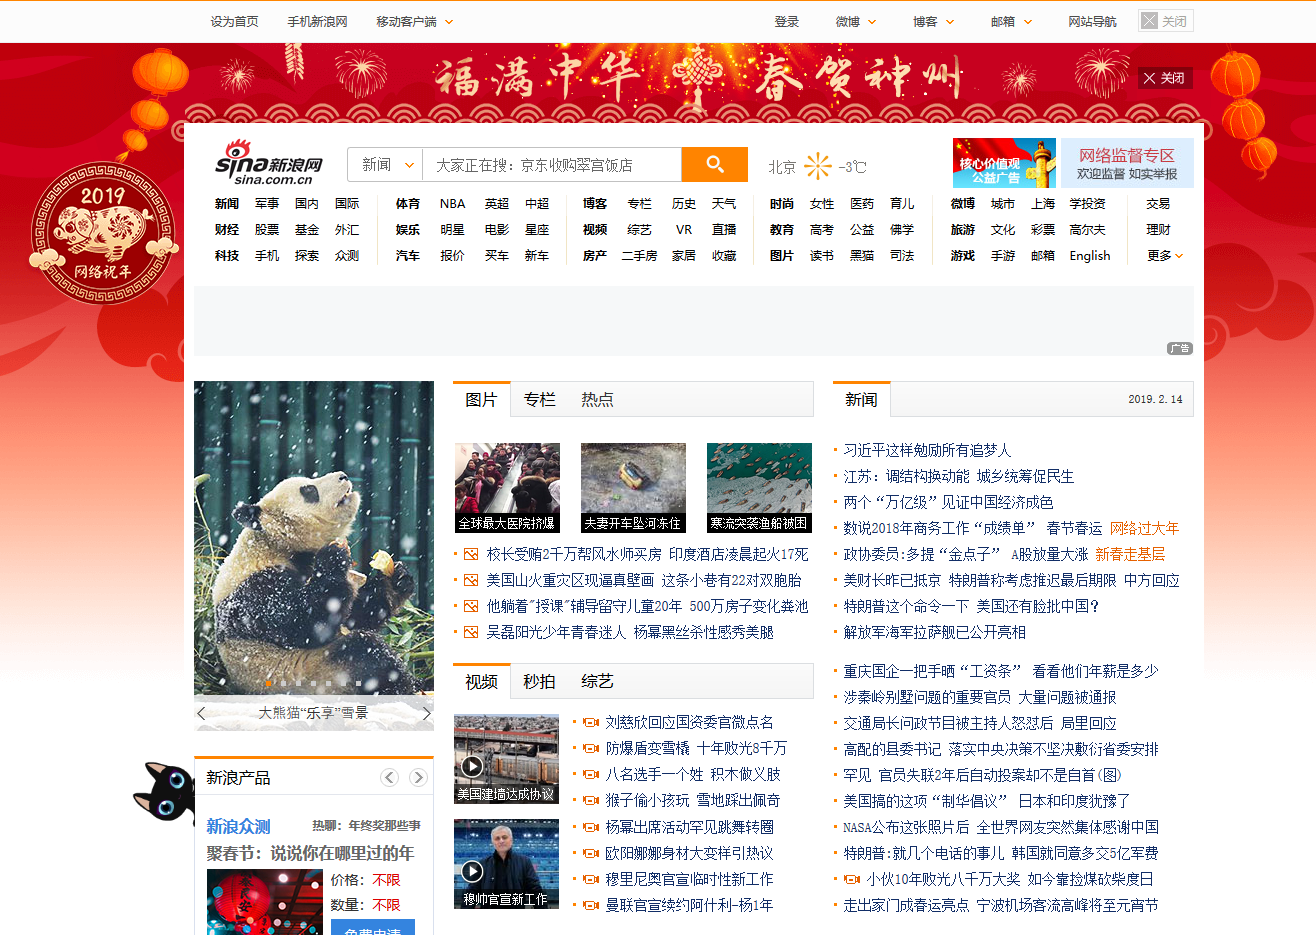 Chinese websites look and feel